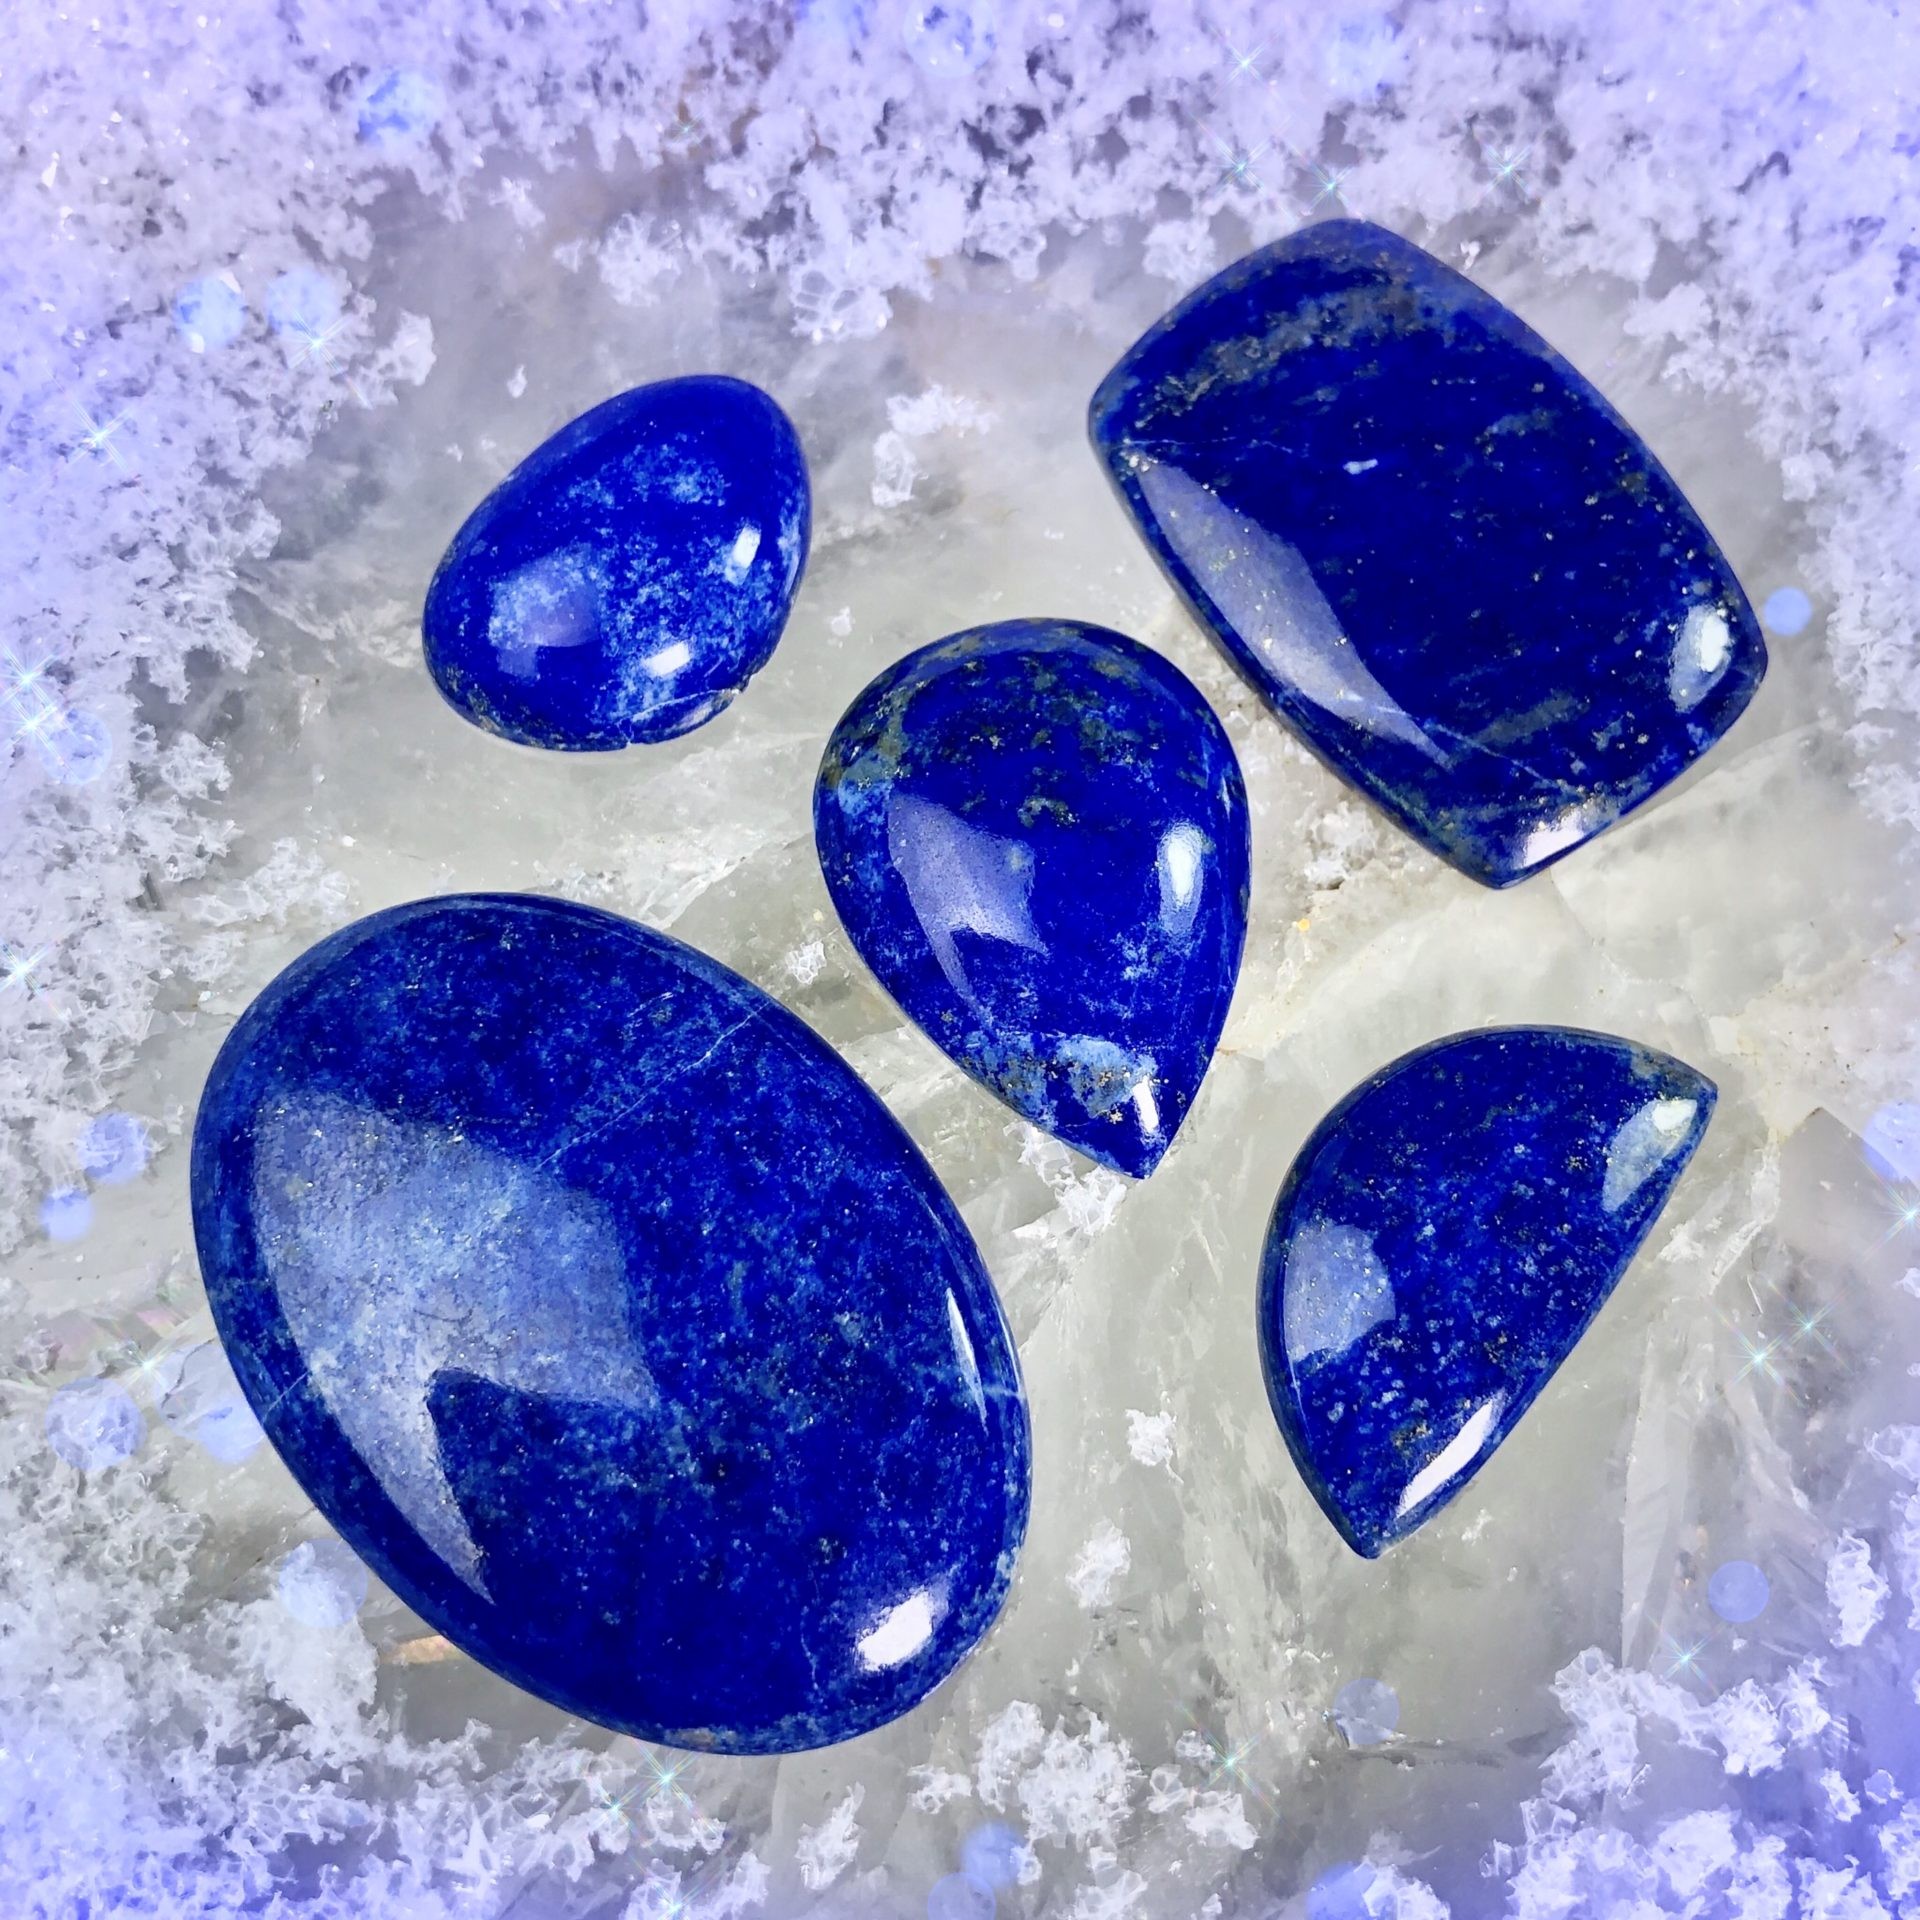 Queen S Lapis Lazuli Cabochons For Royalty Intuition And Psychic Powers